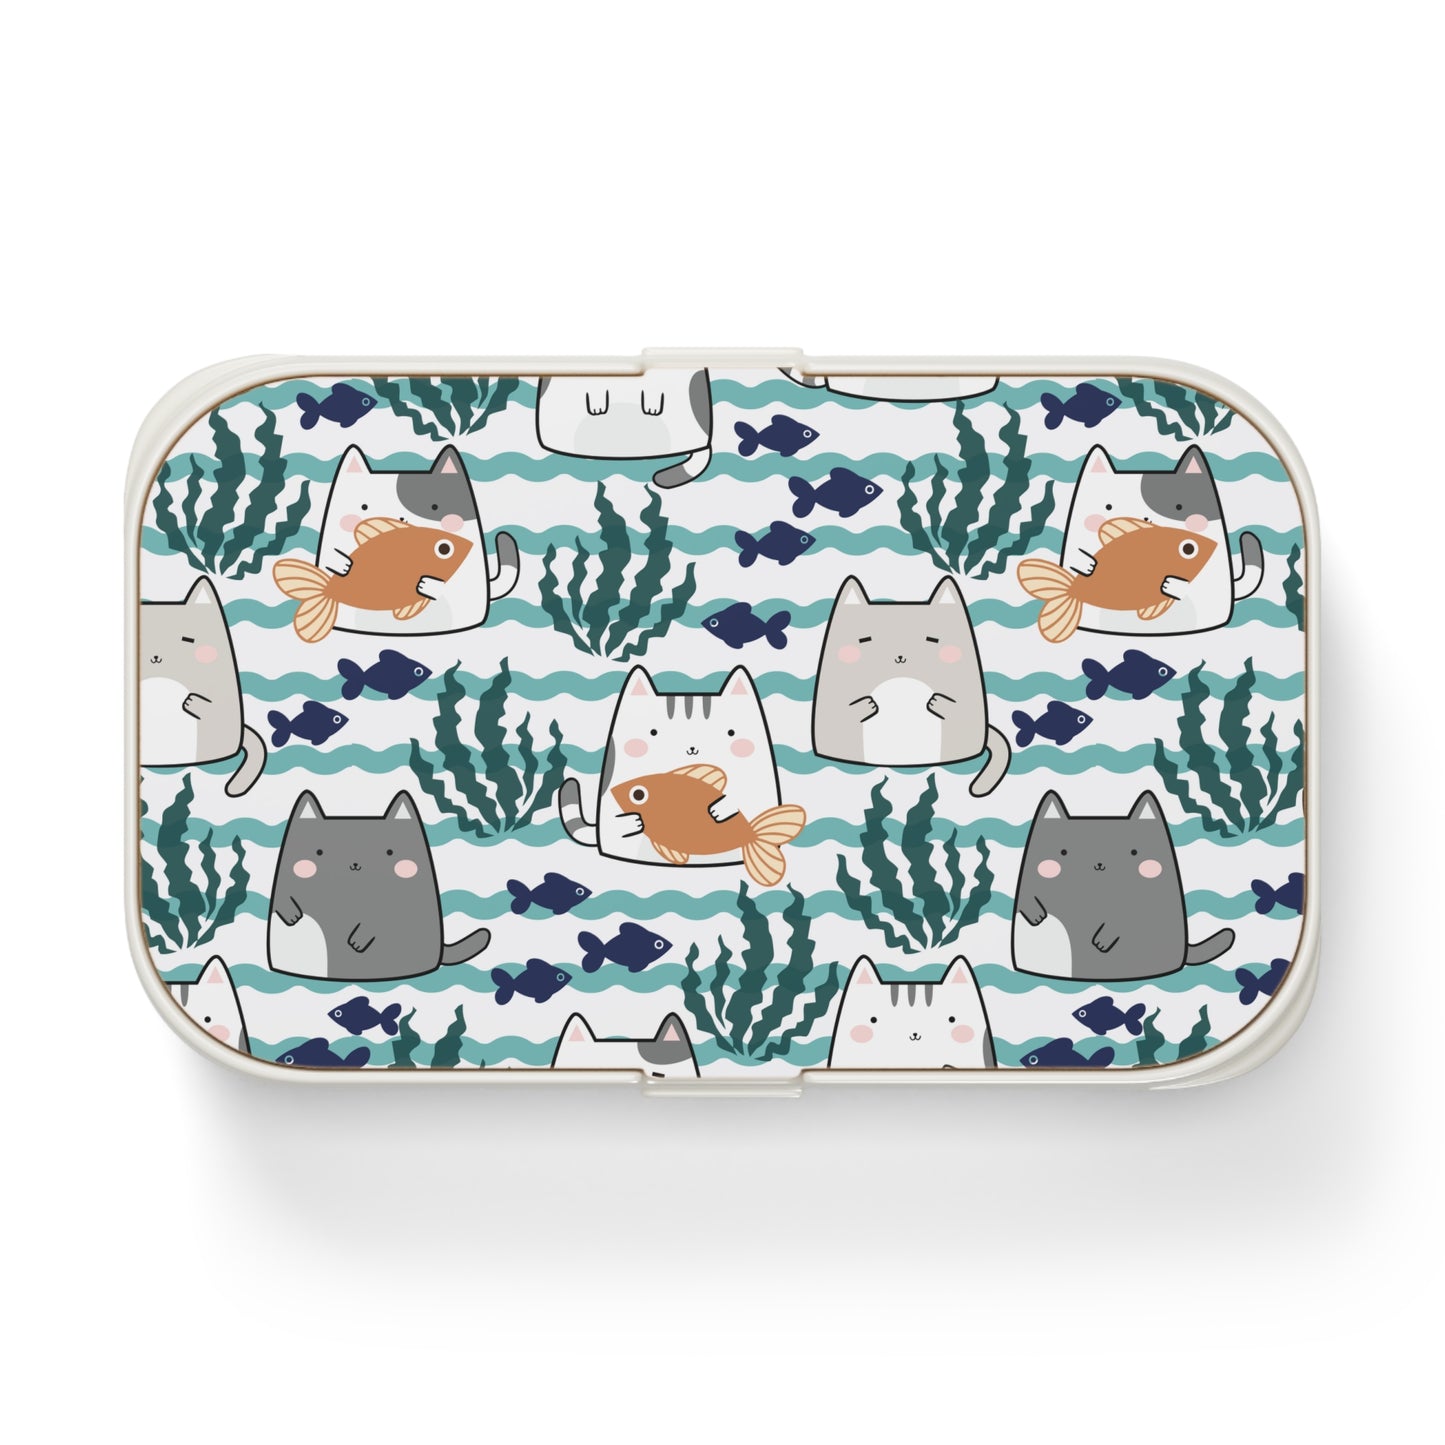 Kawaii Cats and Fishes Bento Lunch Box